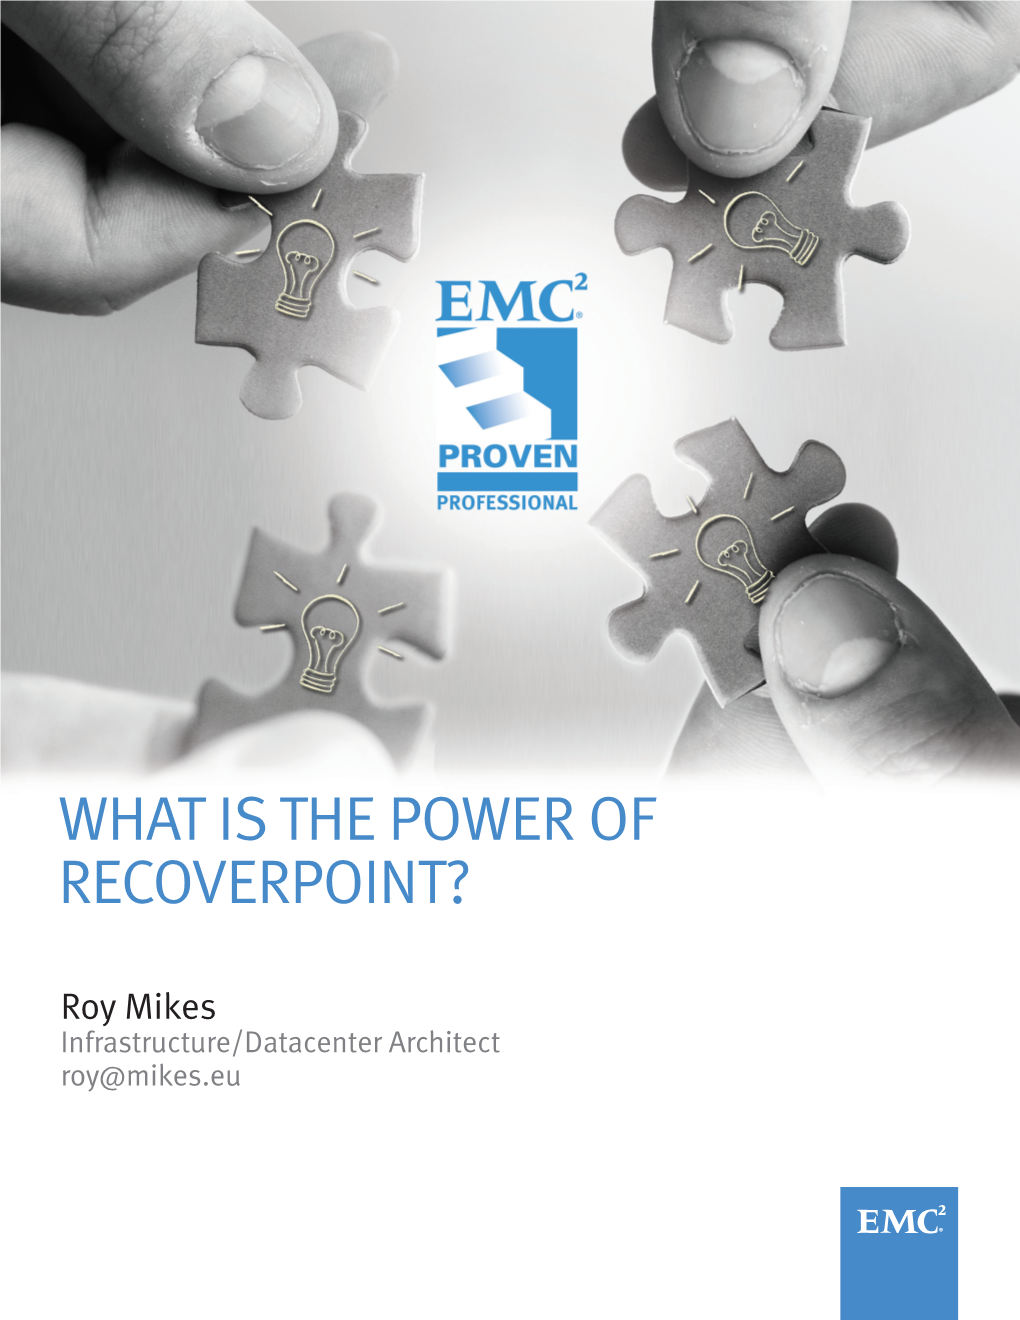 What Is the Power of Recoverpoint?